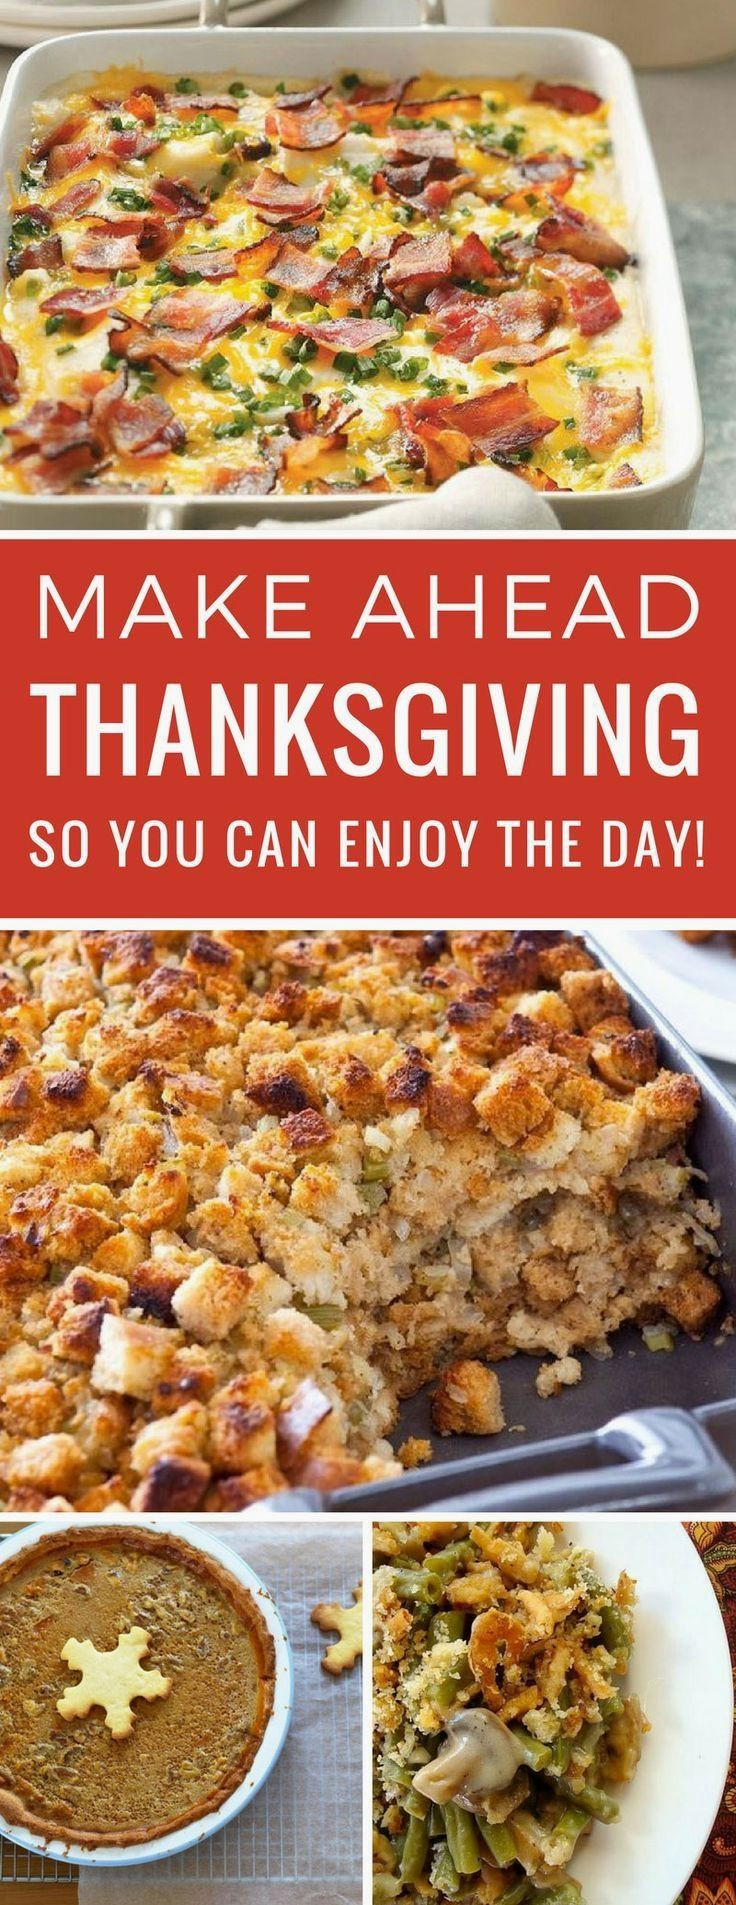 Whole Foods Thanksgiving Dinner 2019
 Pin by Sandy Rudloff on Thanksgiving in 2019